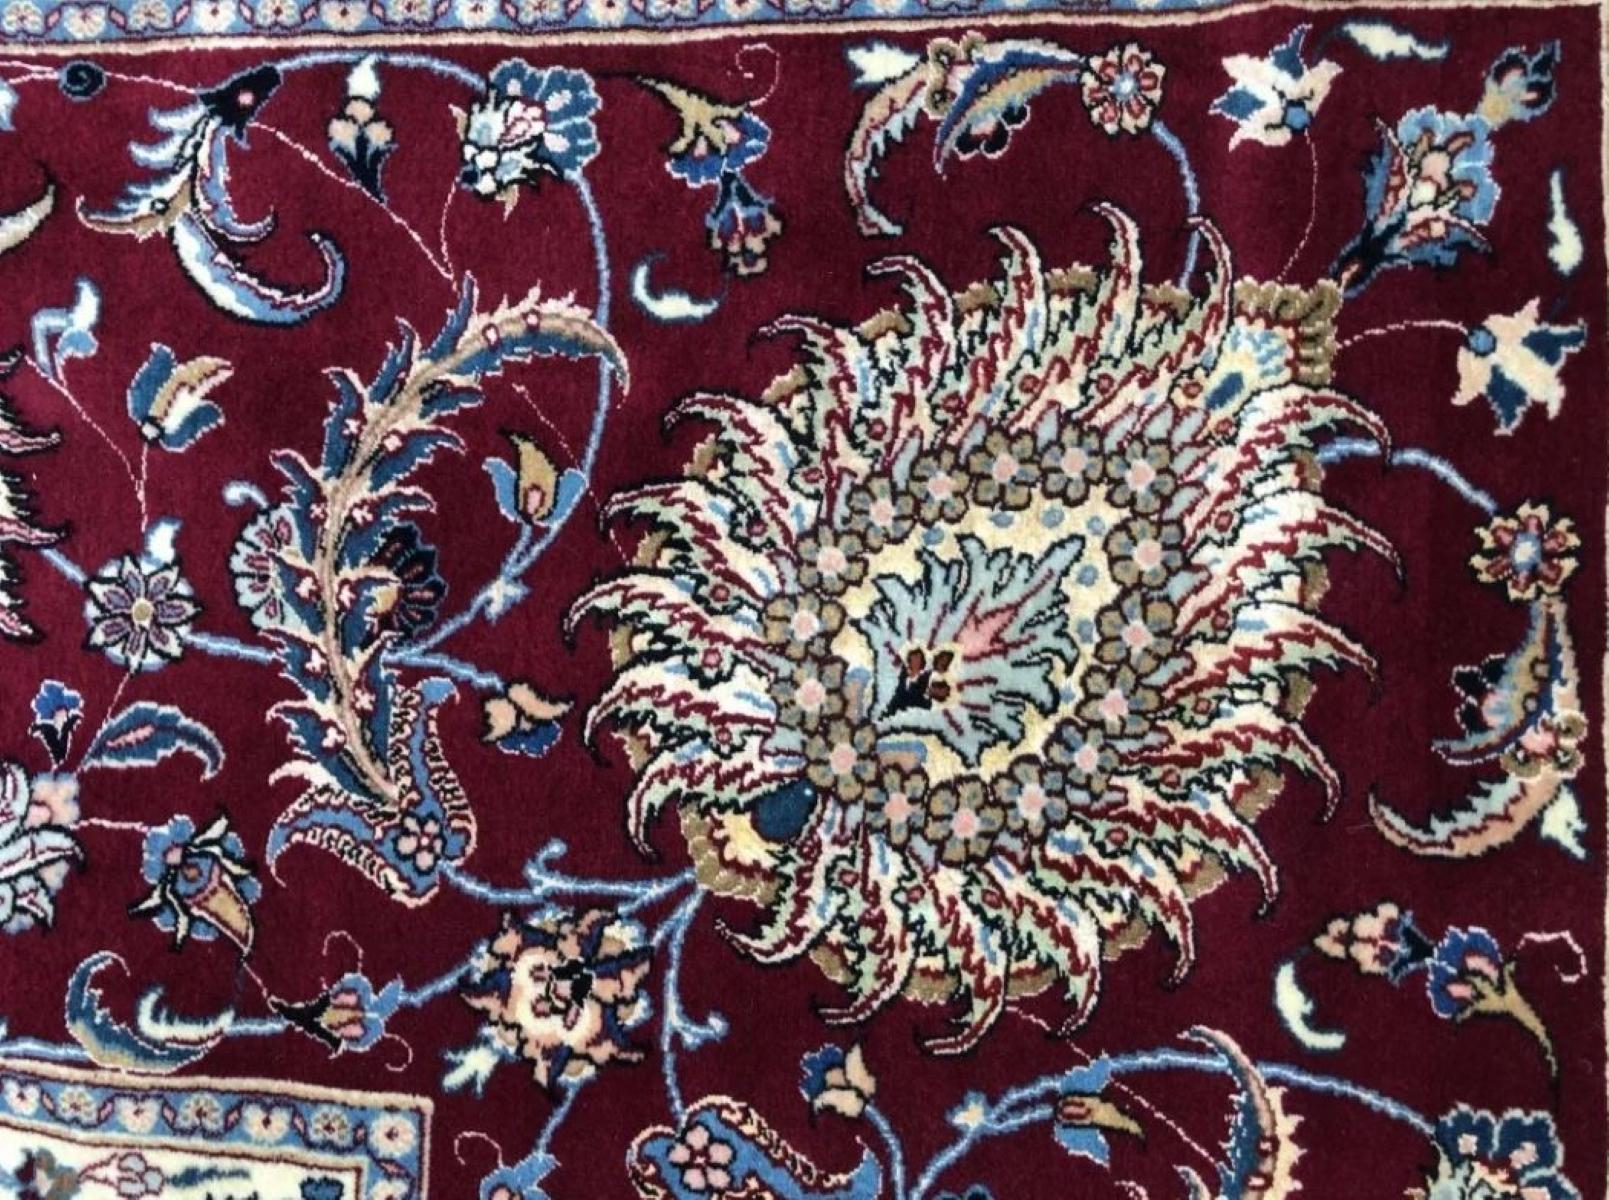 Very fine Persian Mashhad Saber Rug - 21.2' x 12.1' In Excellent Condition For Sale In Newmanstown, PA